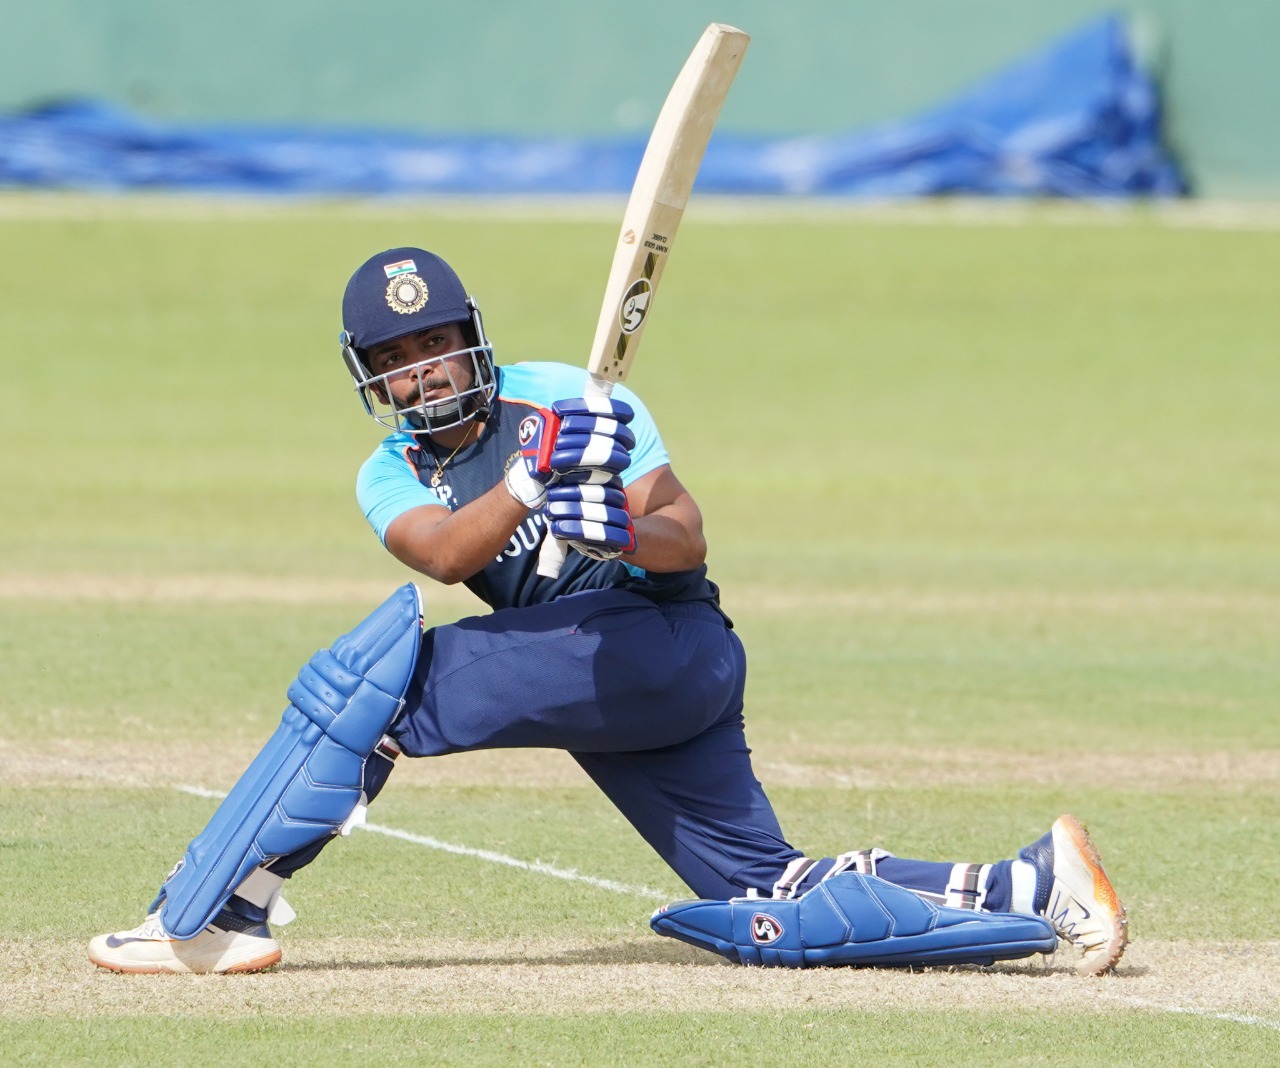 SL v IND 2021 Prithvi Shaw is in great form, changes in footwork and